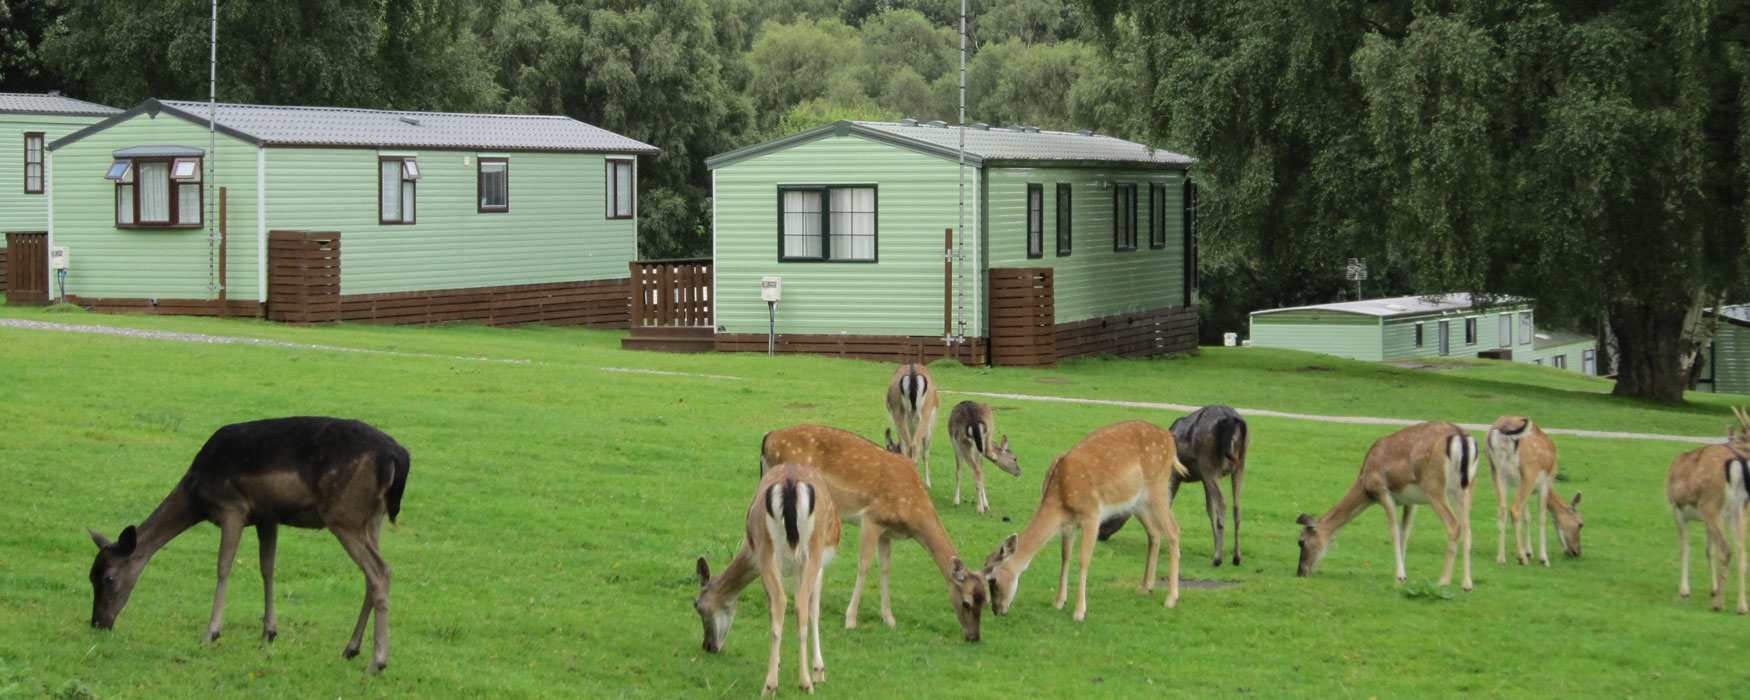 Holiday parks in lovely rural locations